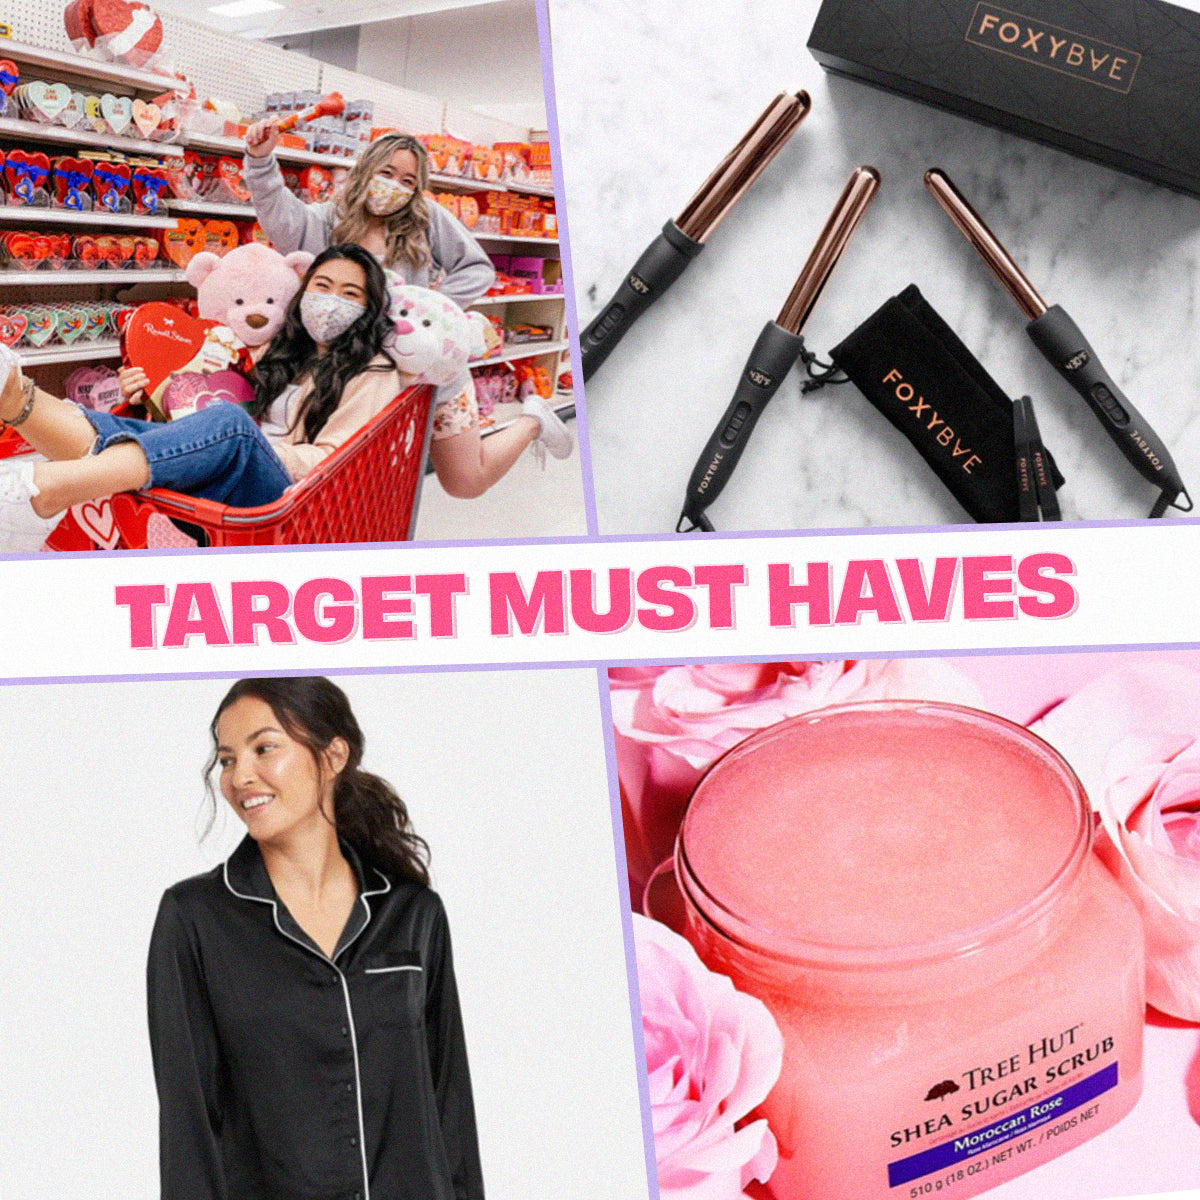 Target Must Haves featured image